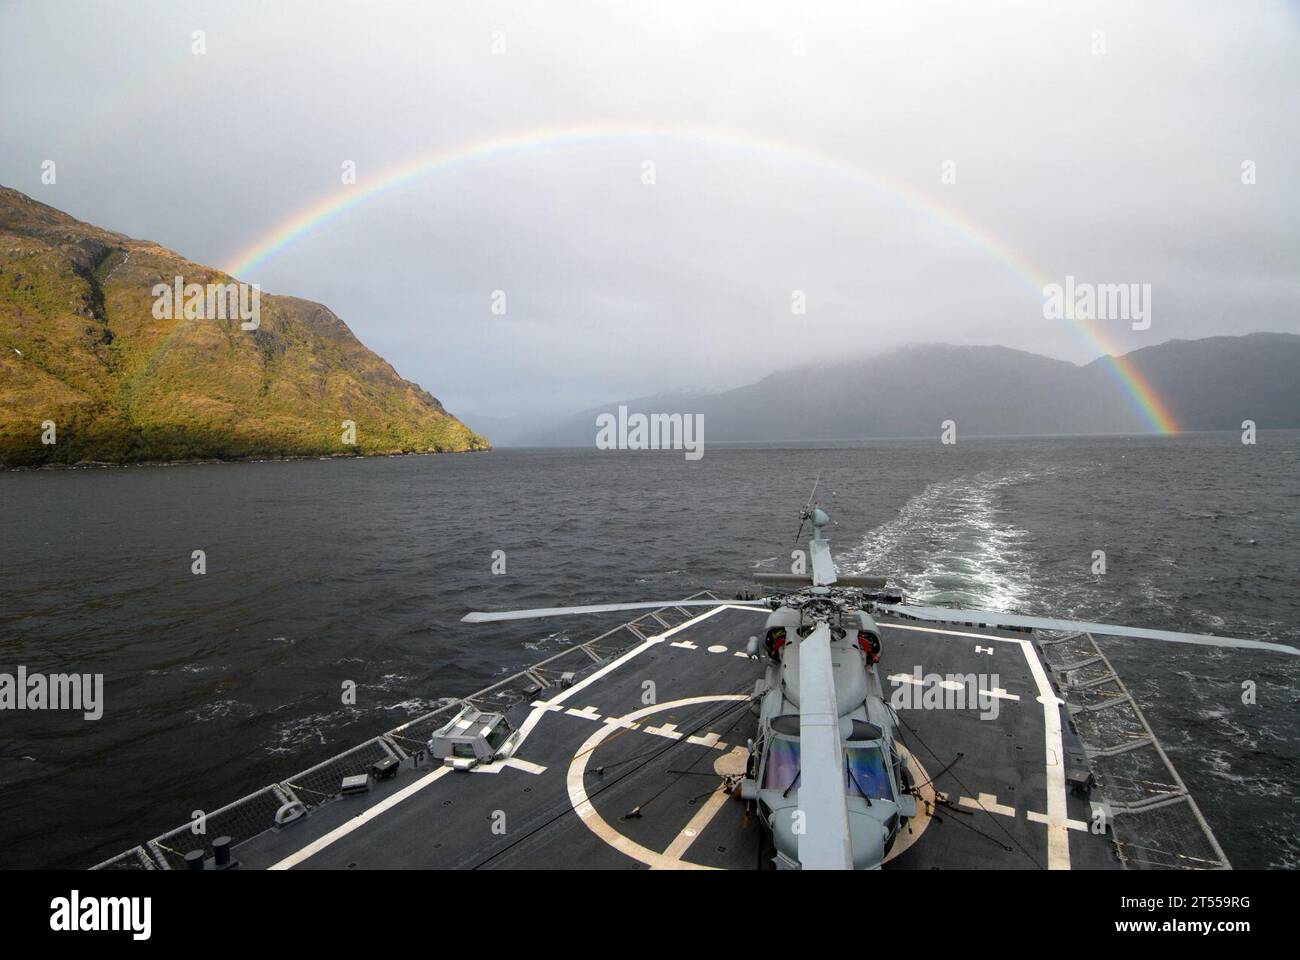 guided-missile frigate, navy, rainbow, Southern Seas 2011, Strait of Magellan, U.S. Navy, U.S. Southern Command, USS Boone (FFG 28) Stock Photo